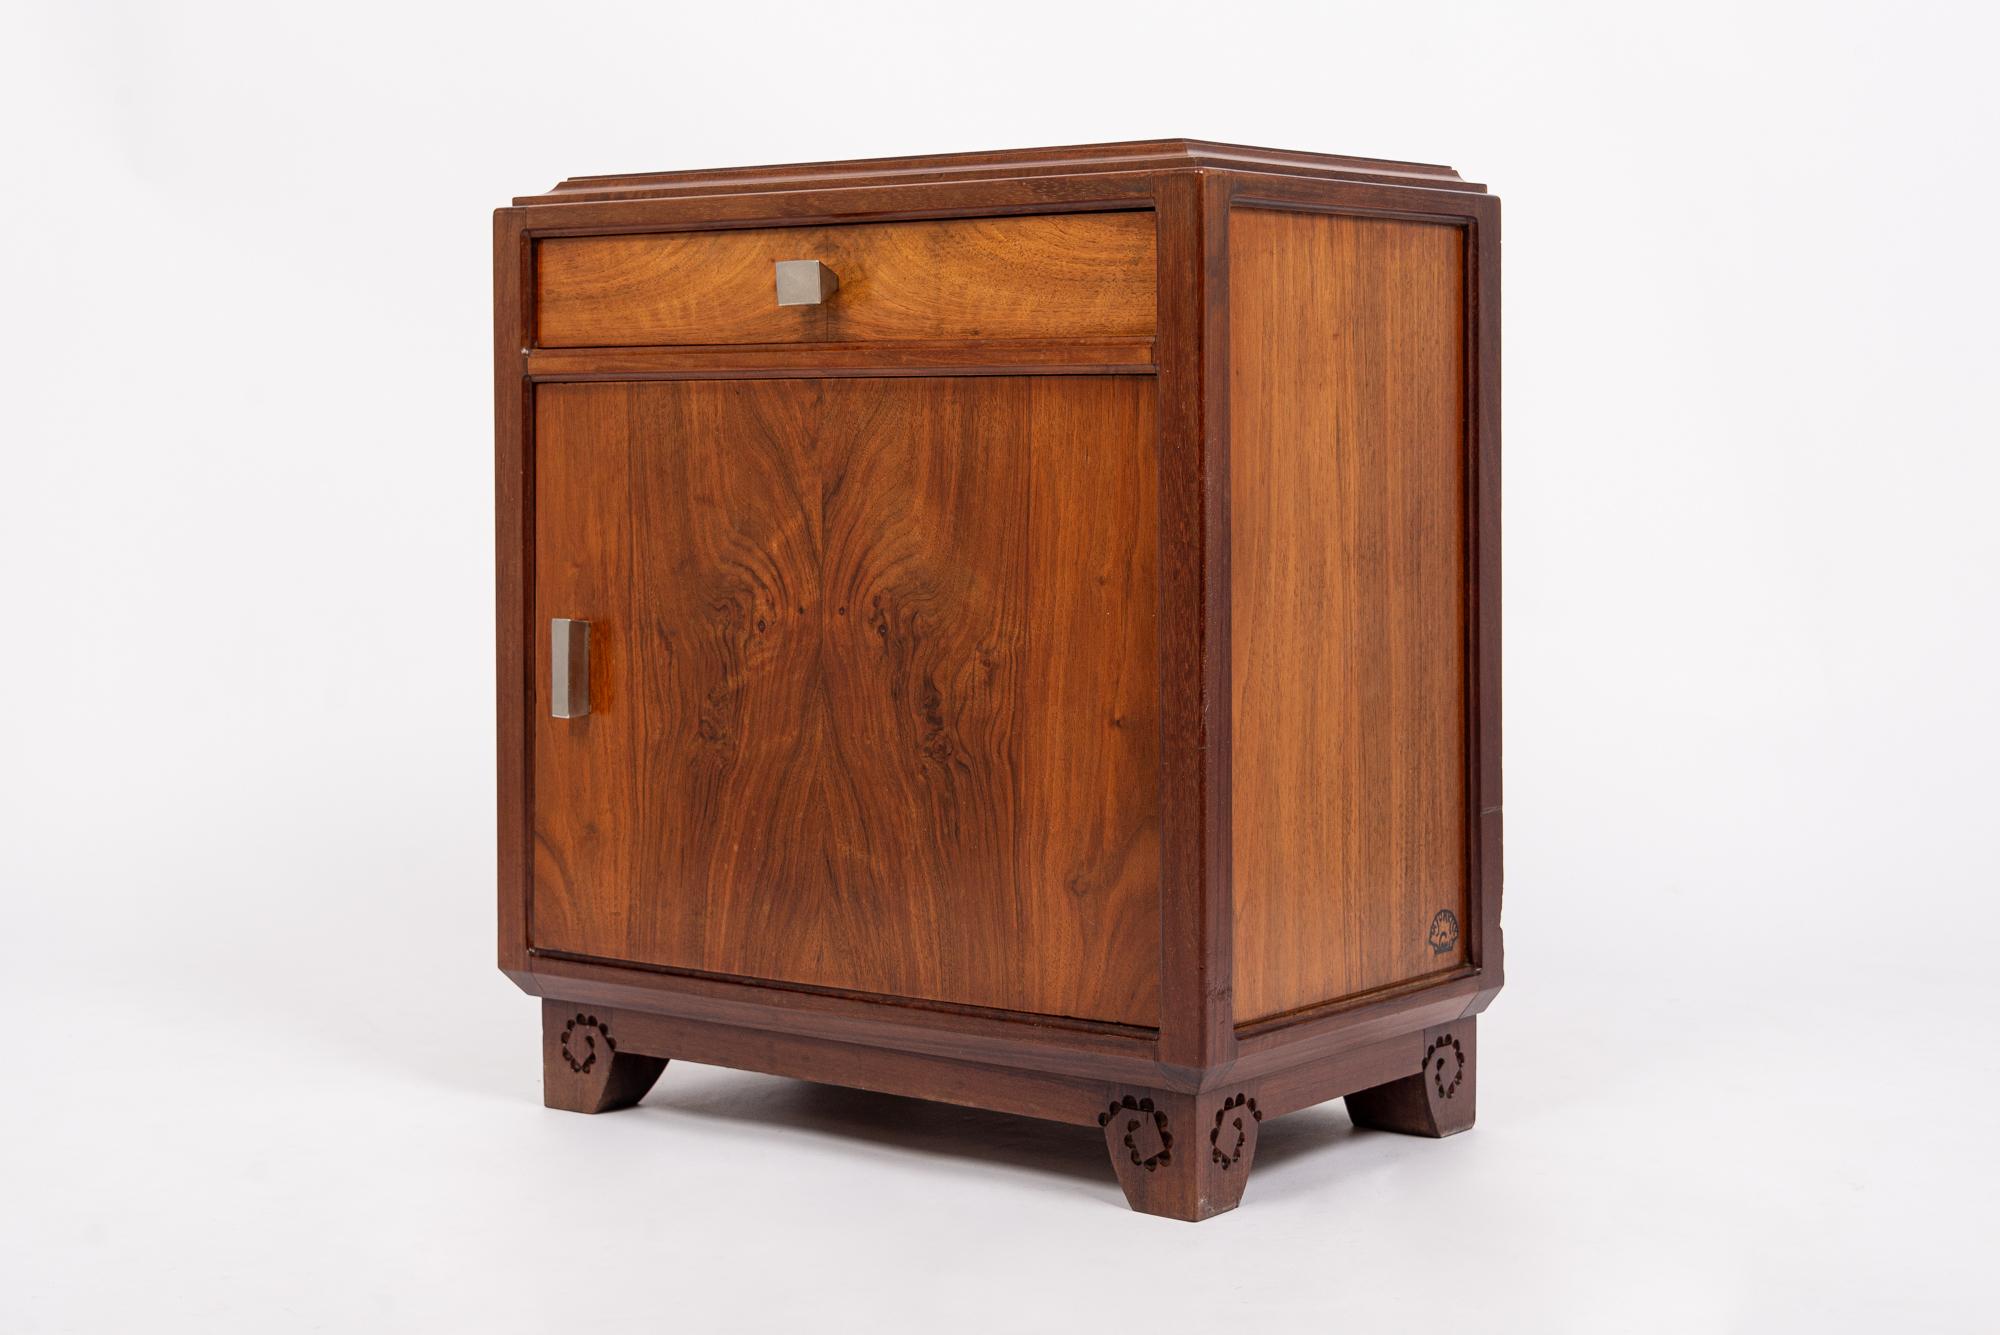 French Antique Art Nouveau Small Wooden Cabinet by Majorelle, France, Signed For Sale